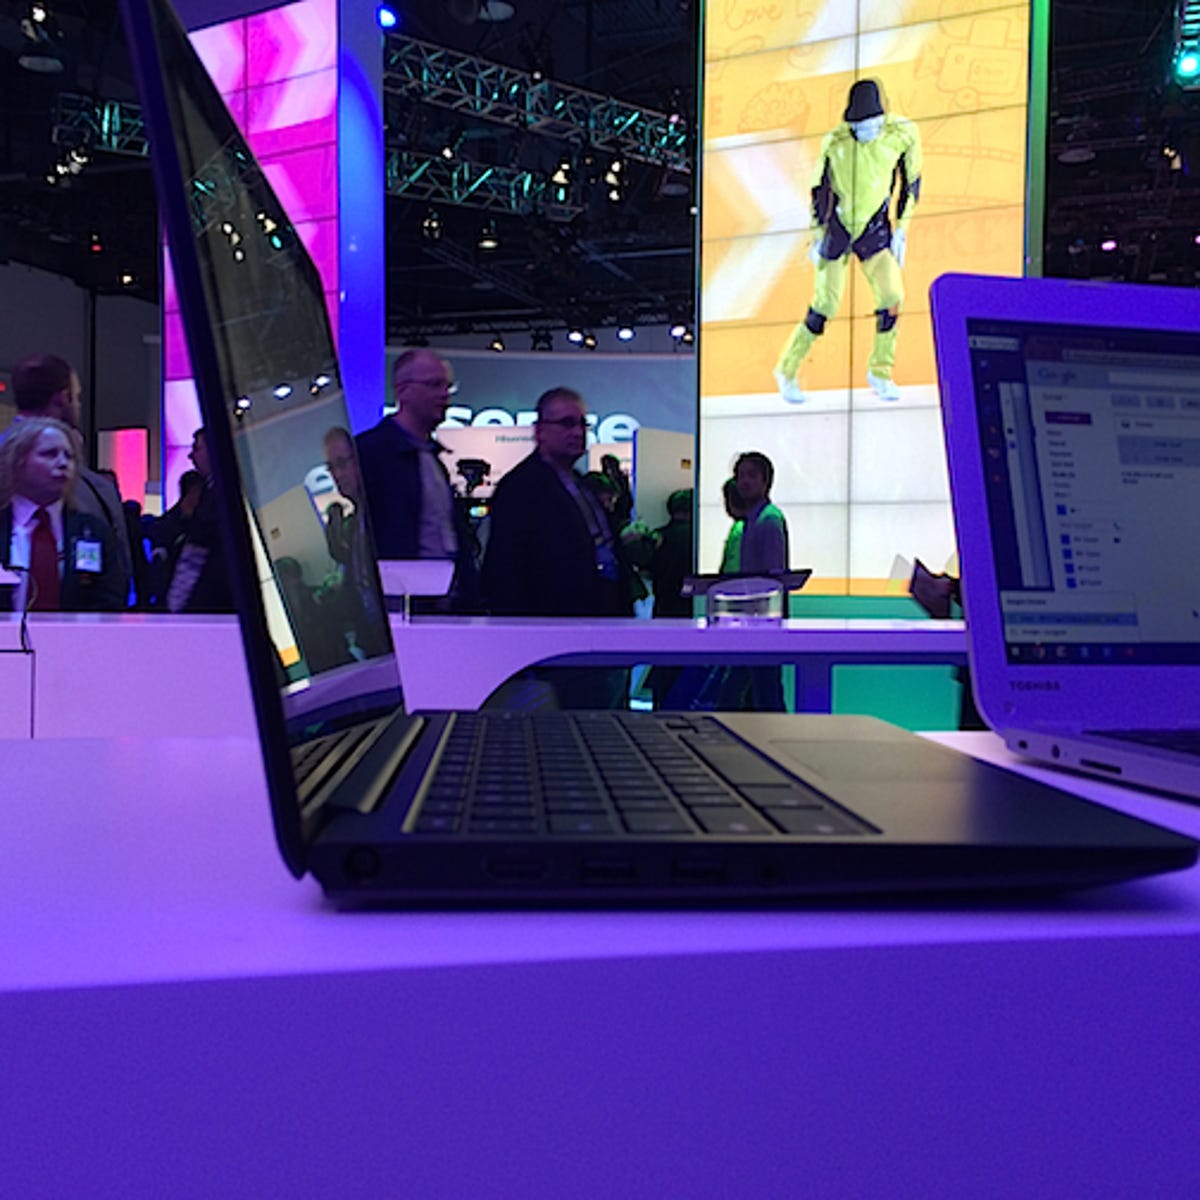 Dell's Chromebook was on display at the Intel booth.